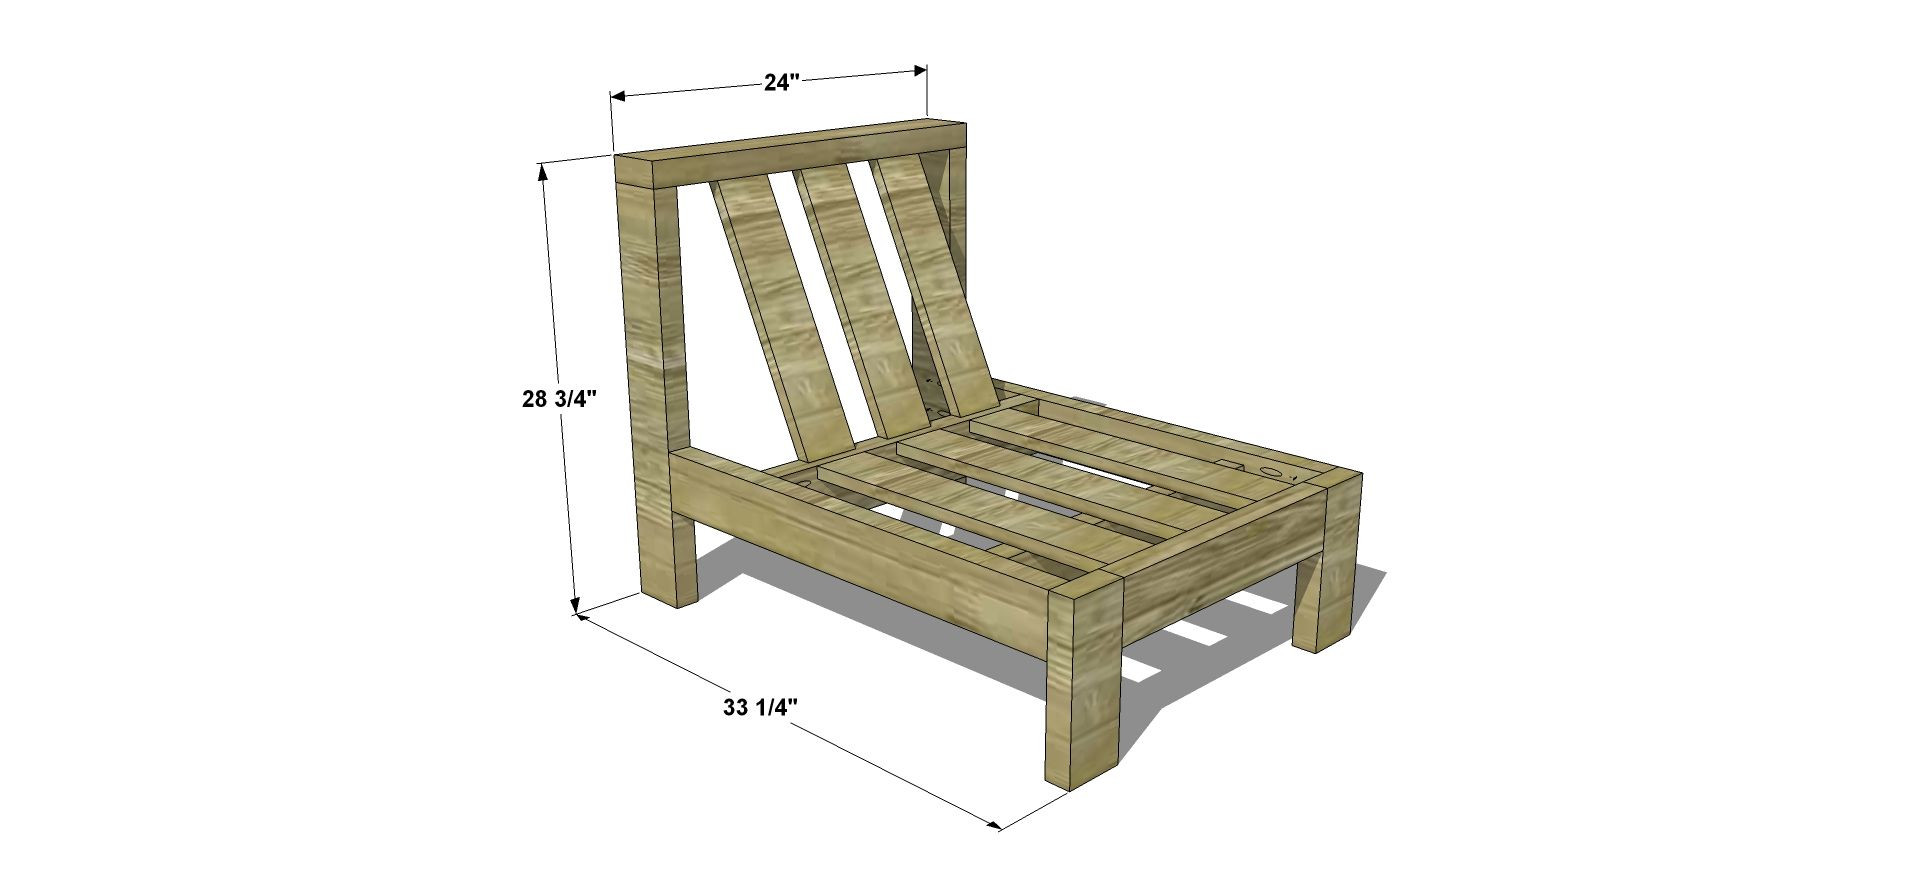 DIY Outdoor Sectional Plans
 Dimensions for Free DIY Furniture Plans How to Build an